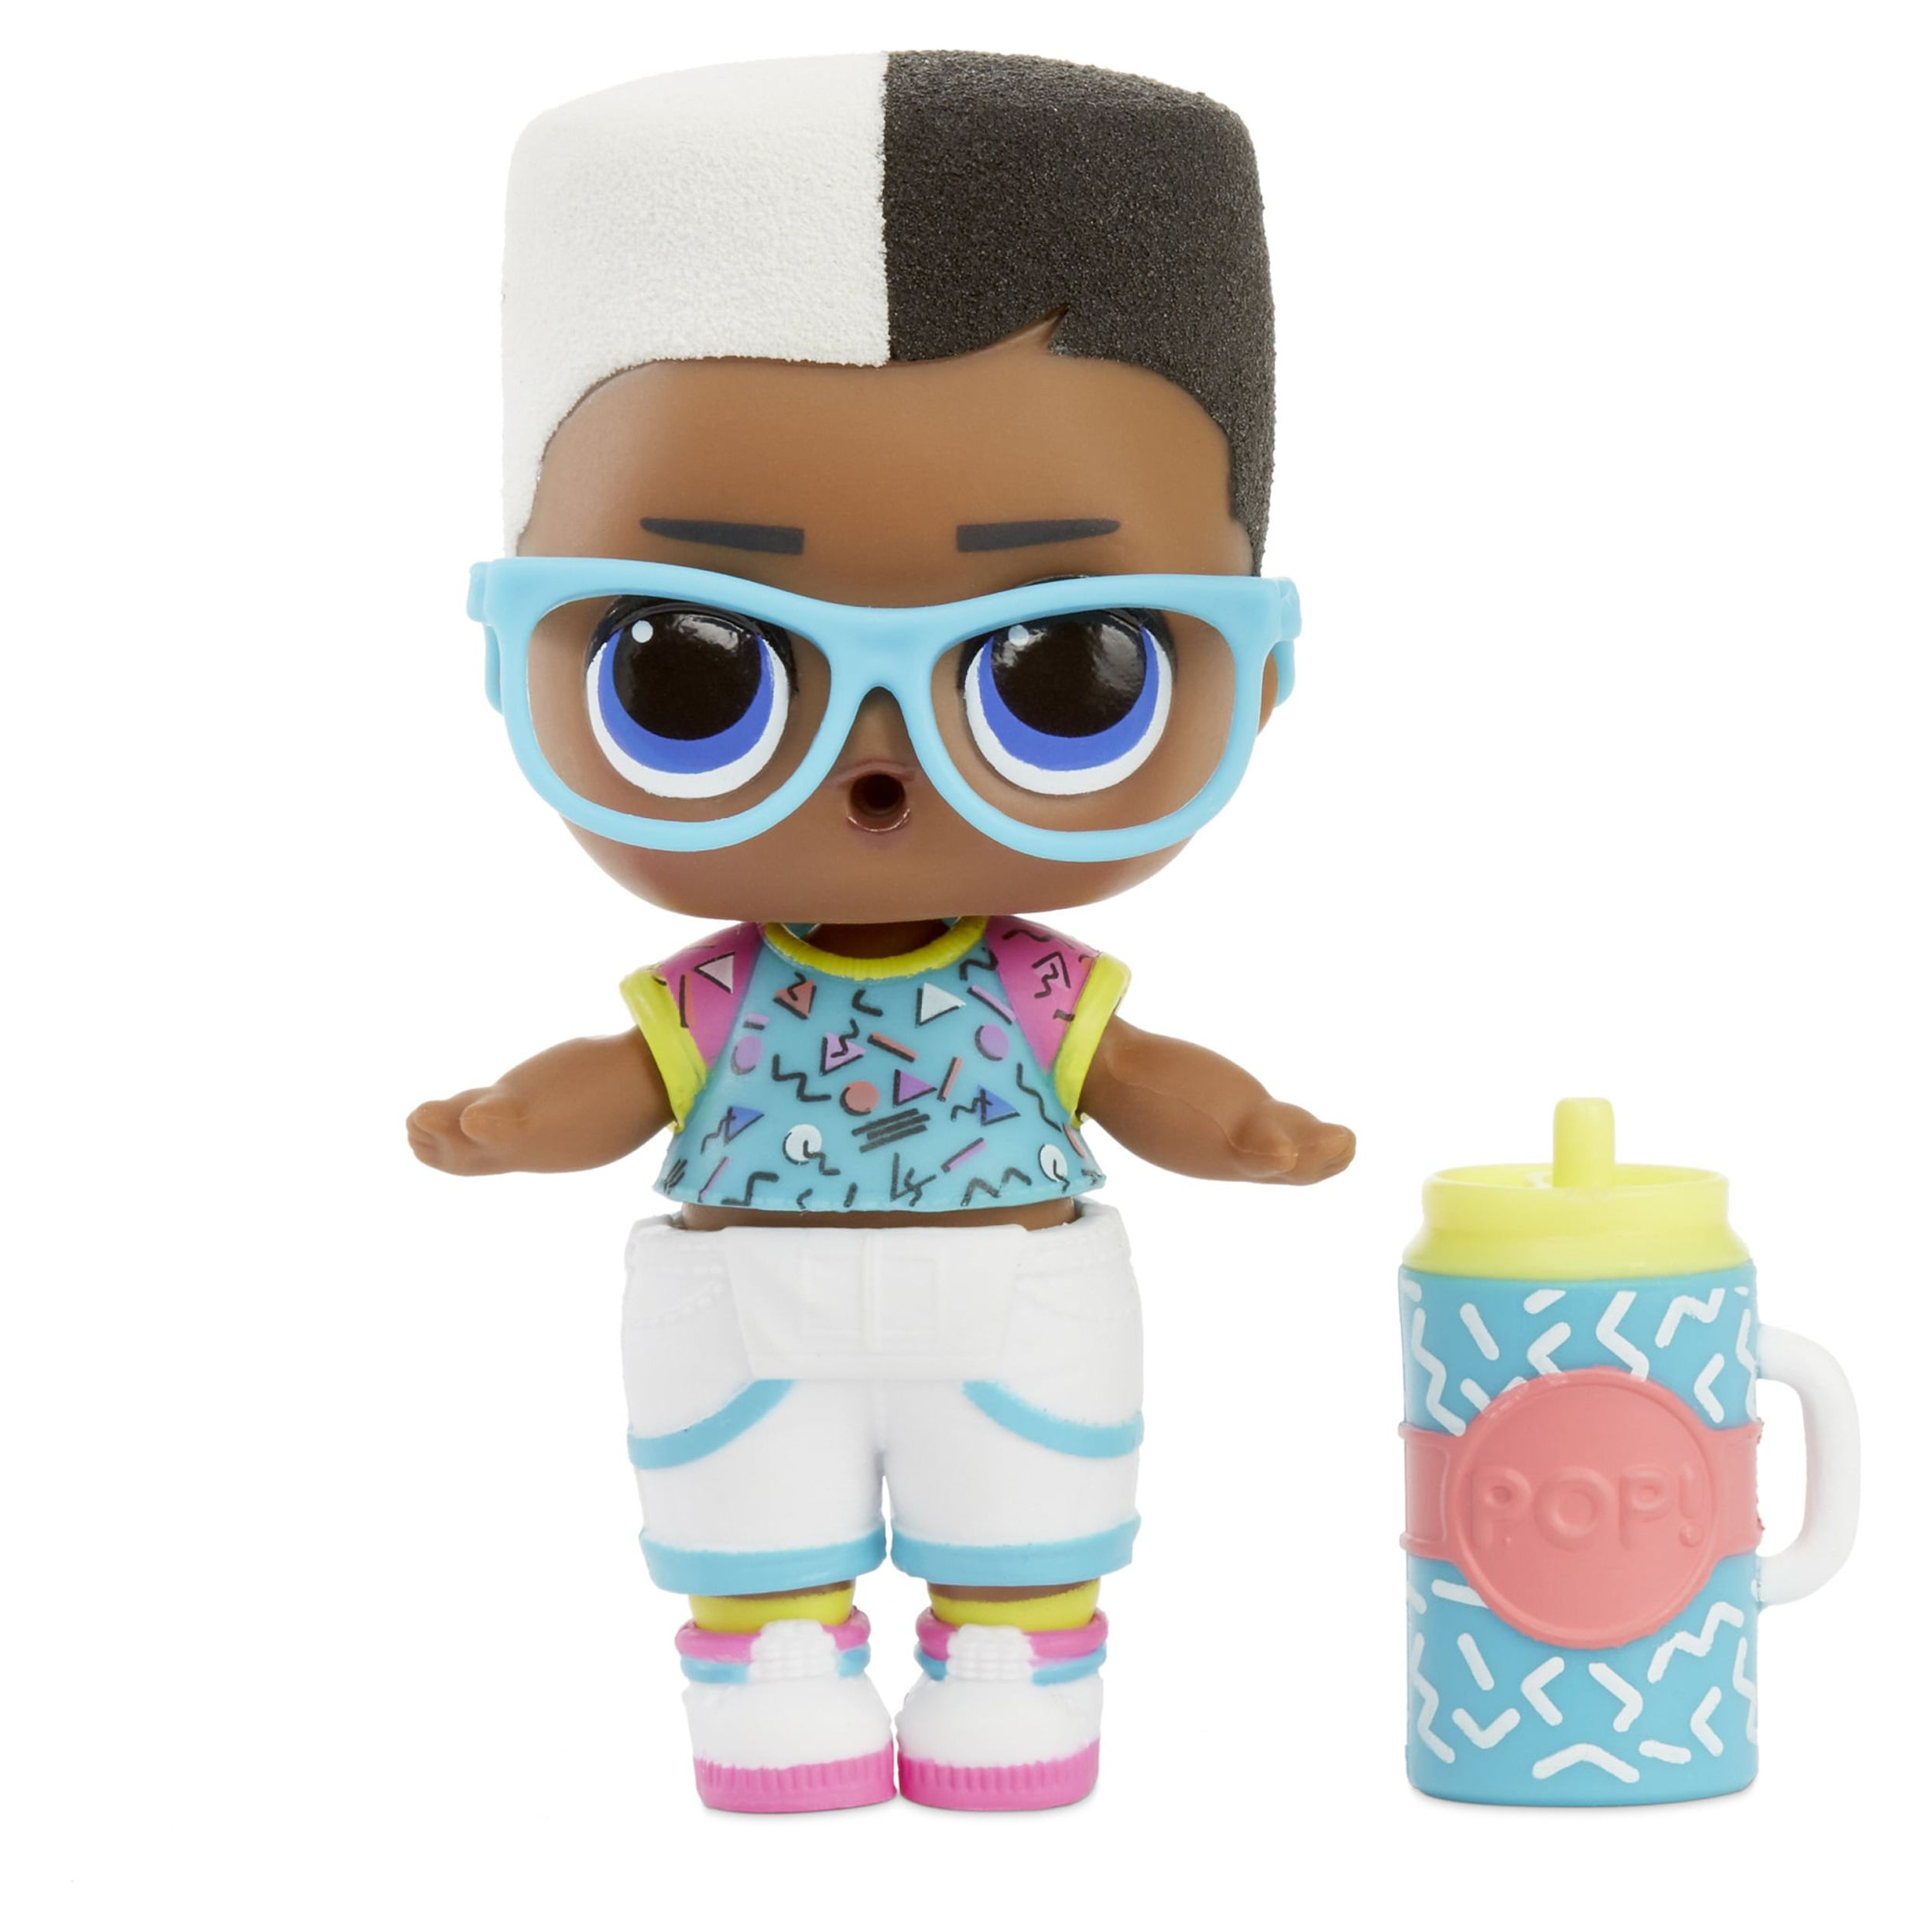 LOL Surprise Boys Dolls With 7 Surprises Including Outfit, Bottle, Accessory, Shoes, Doll, and More For Kids Ages 5-11 - image 4 of 7